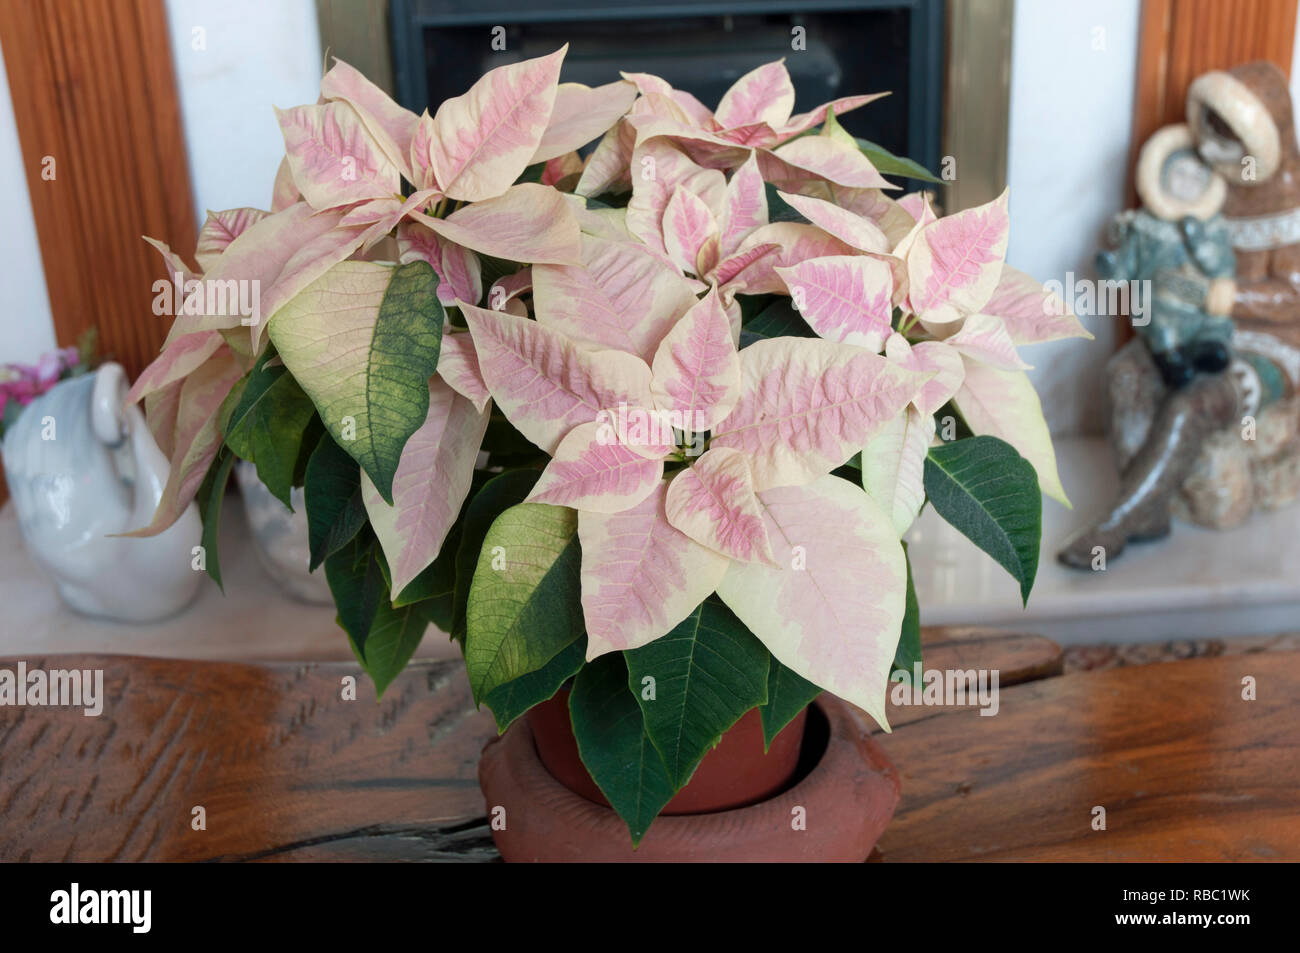 Poinsettia pulcherima showing variegated leaves  Plants are usually sold at christmas time other colours are Red White and Cream leaves Stock Photo